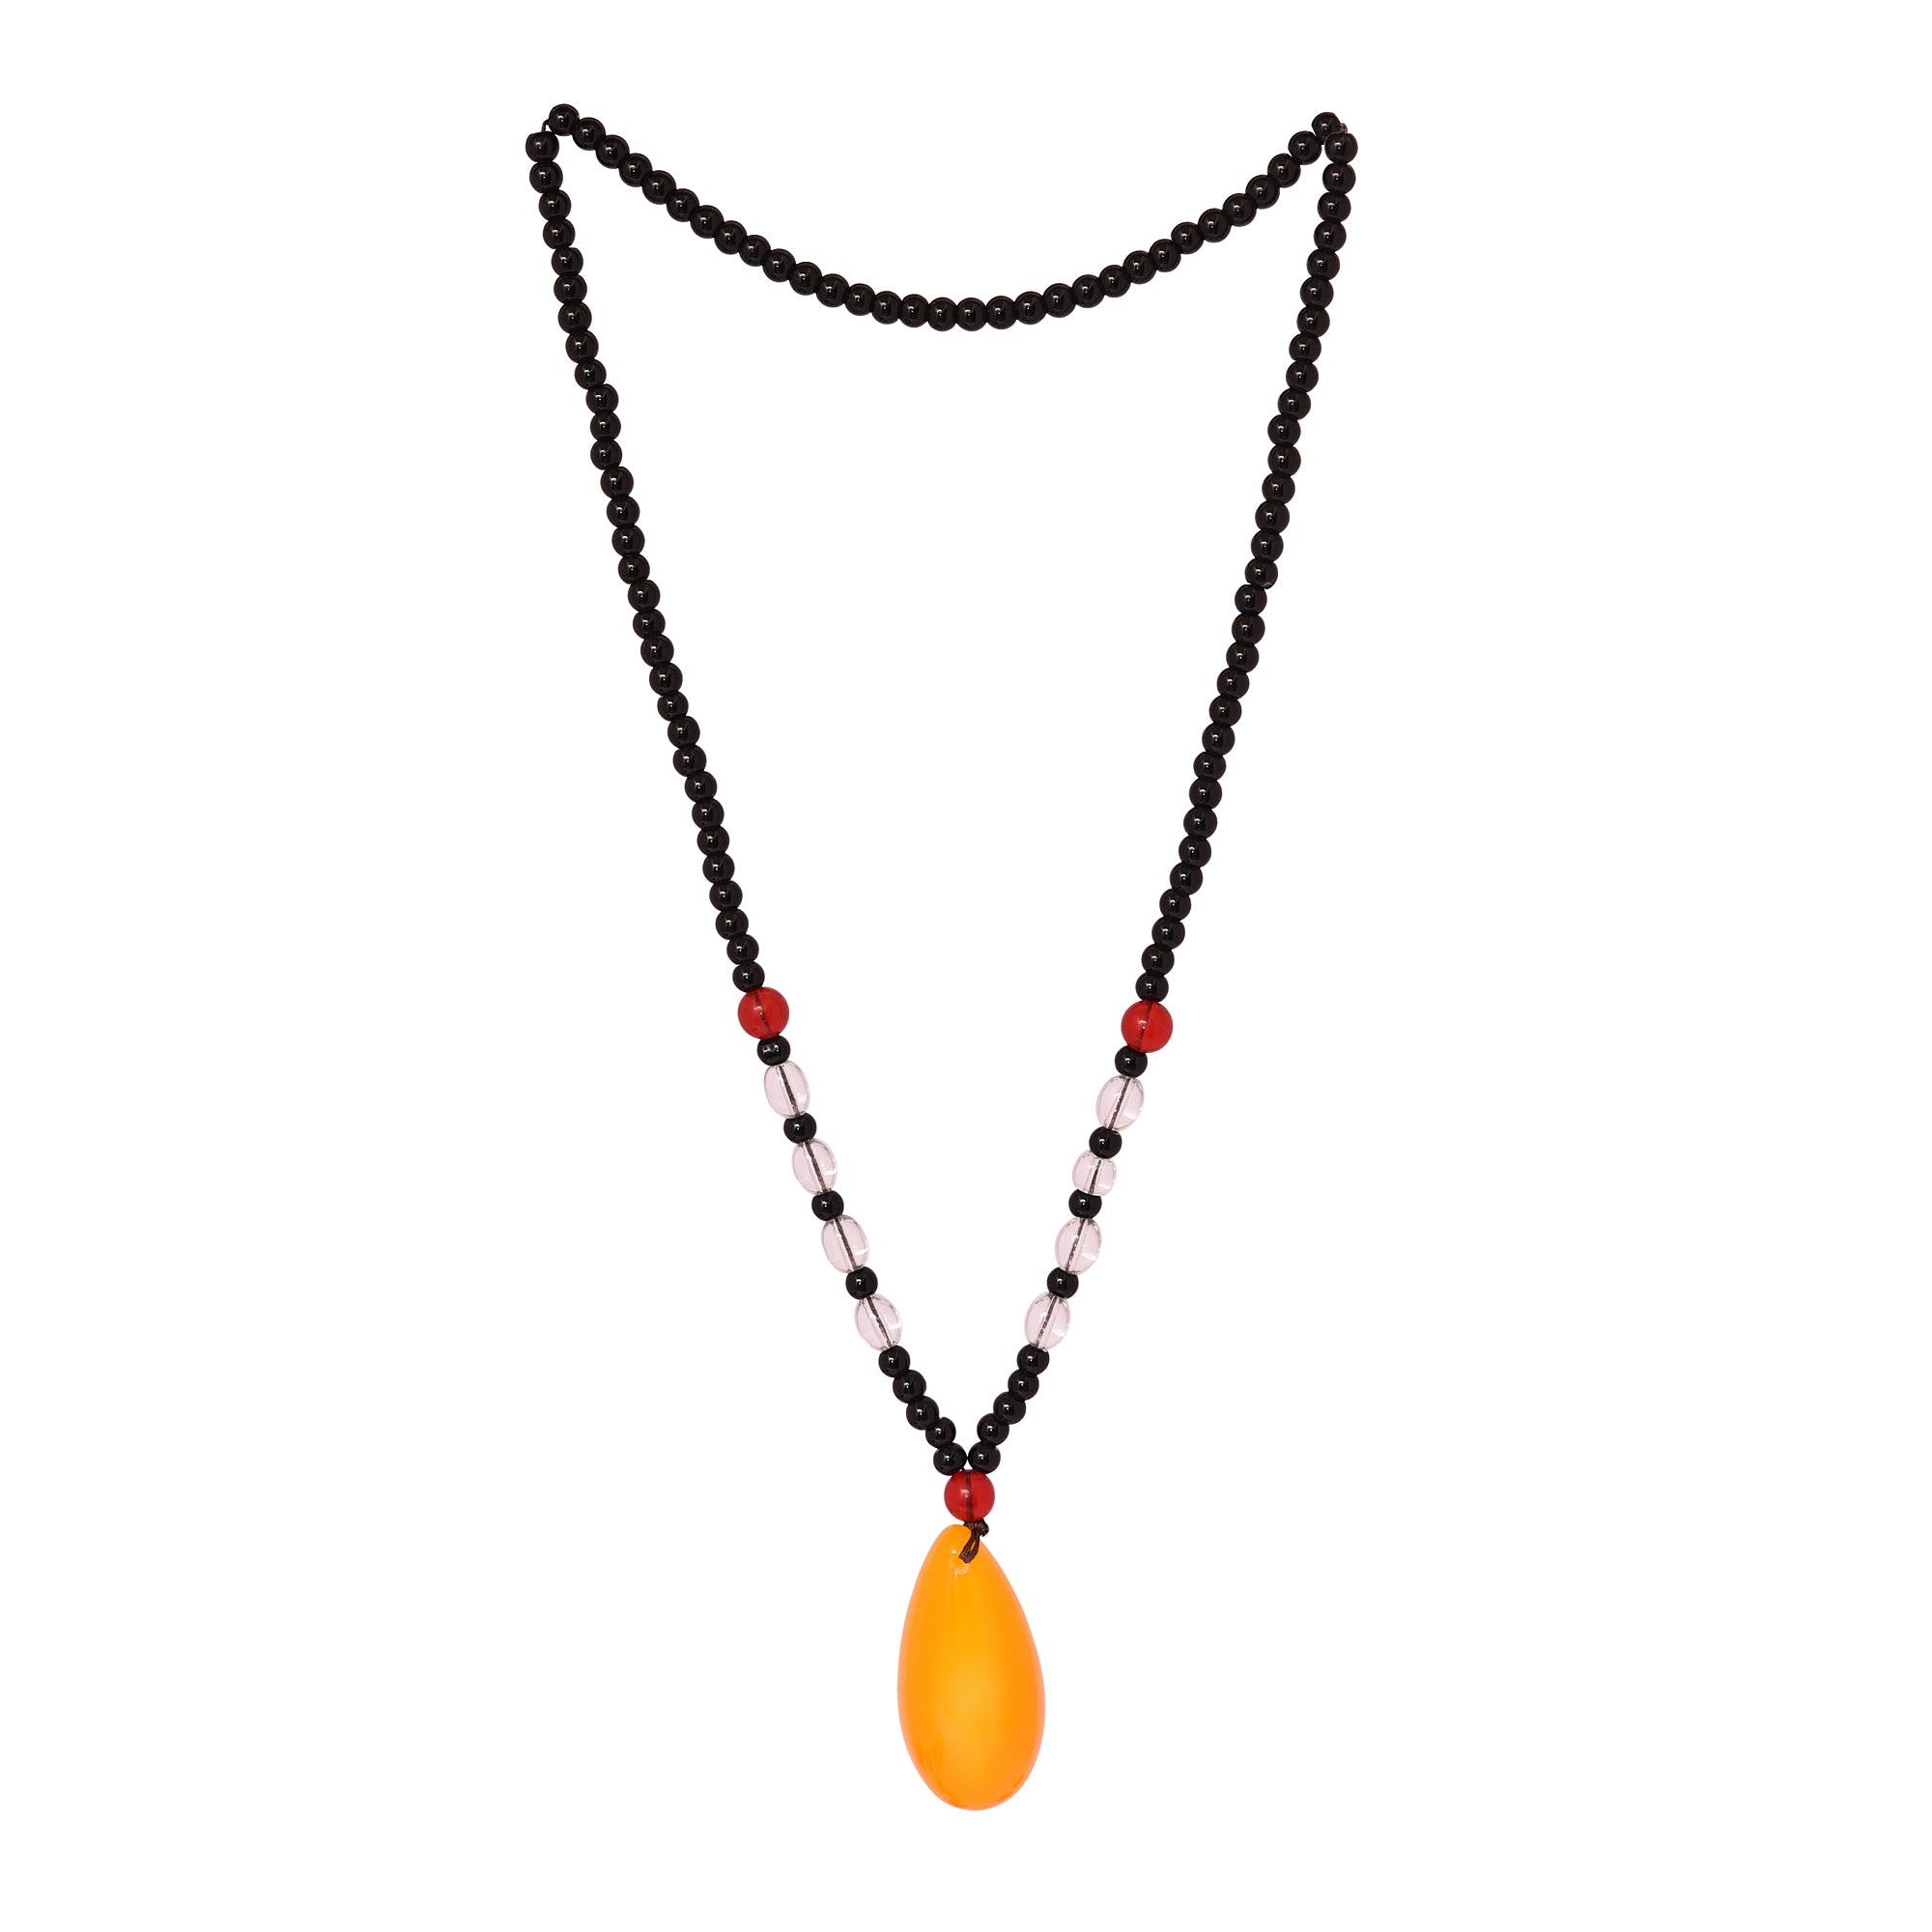 Inspirational Necklaces with Yellow Oval Pendants - The Fineworld